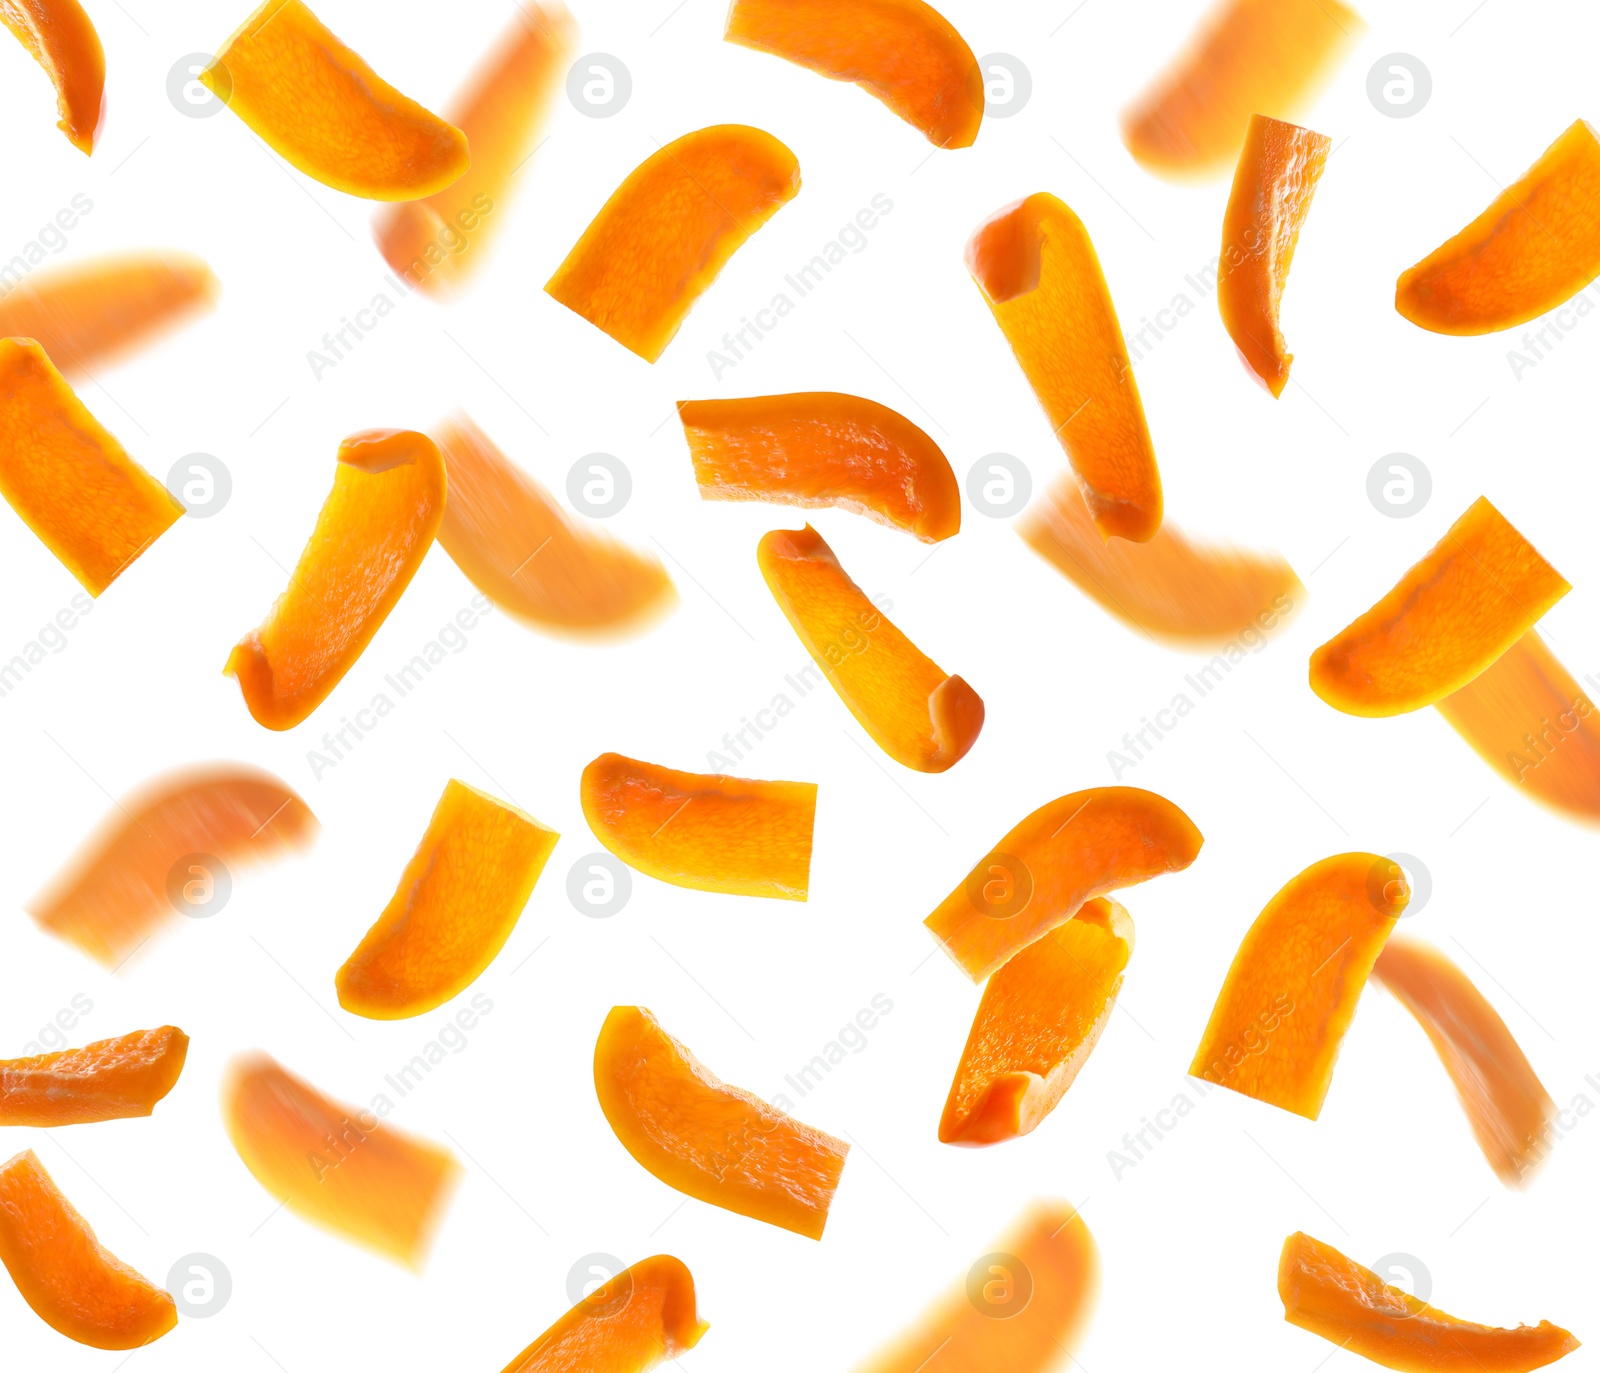 Image of Falling cut orange bell peppers on white background